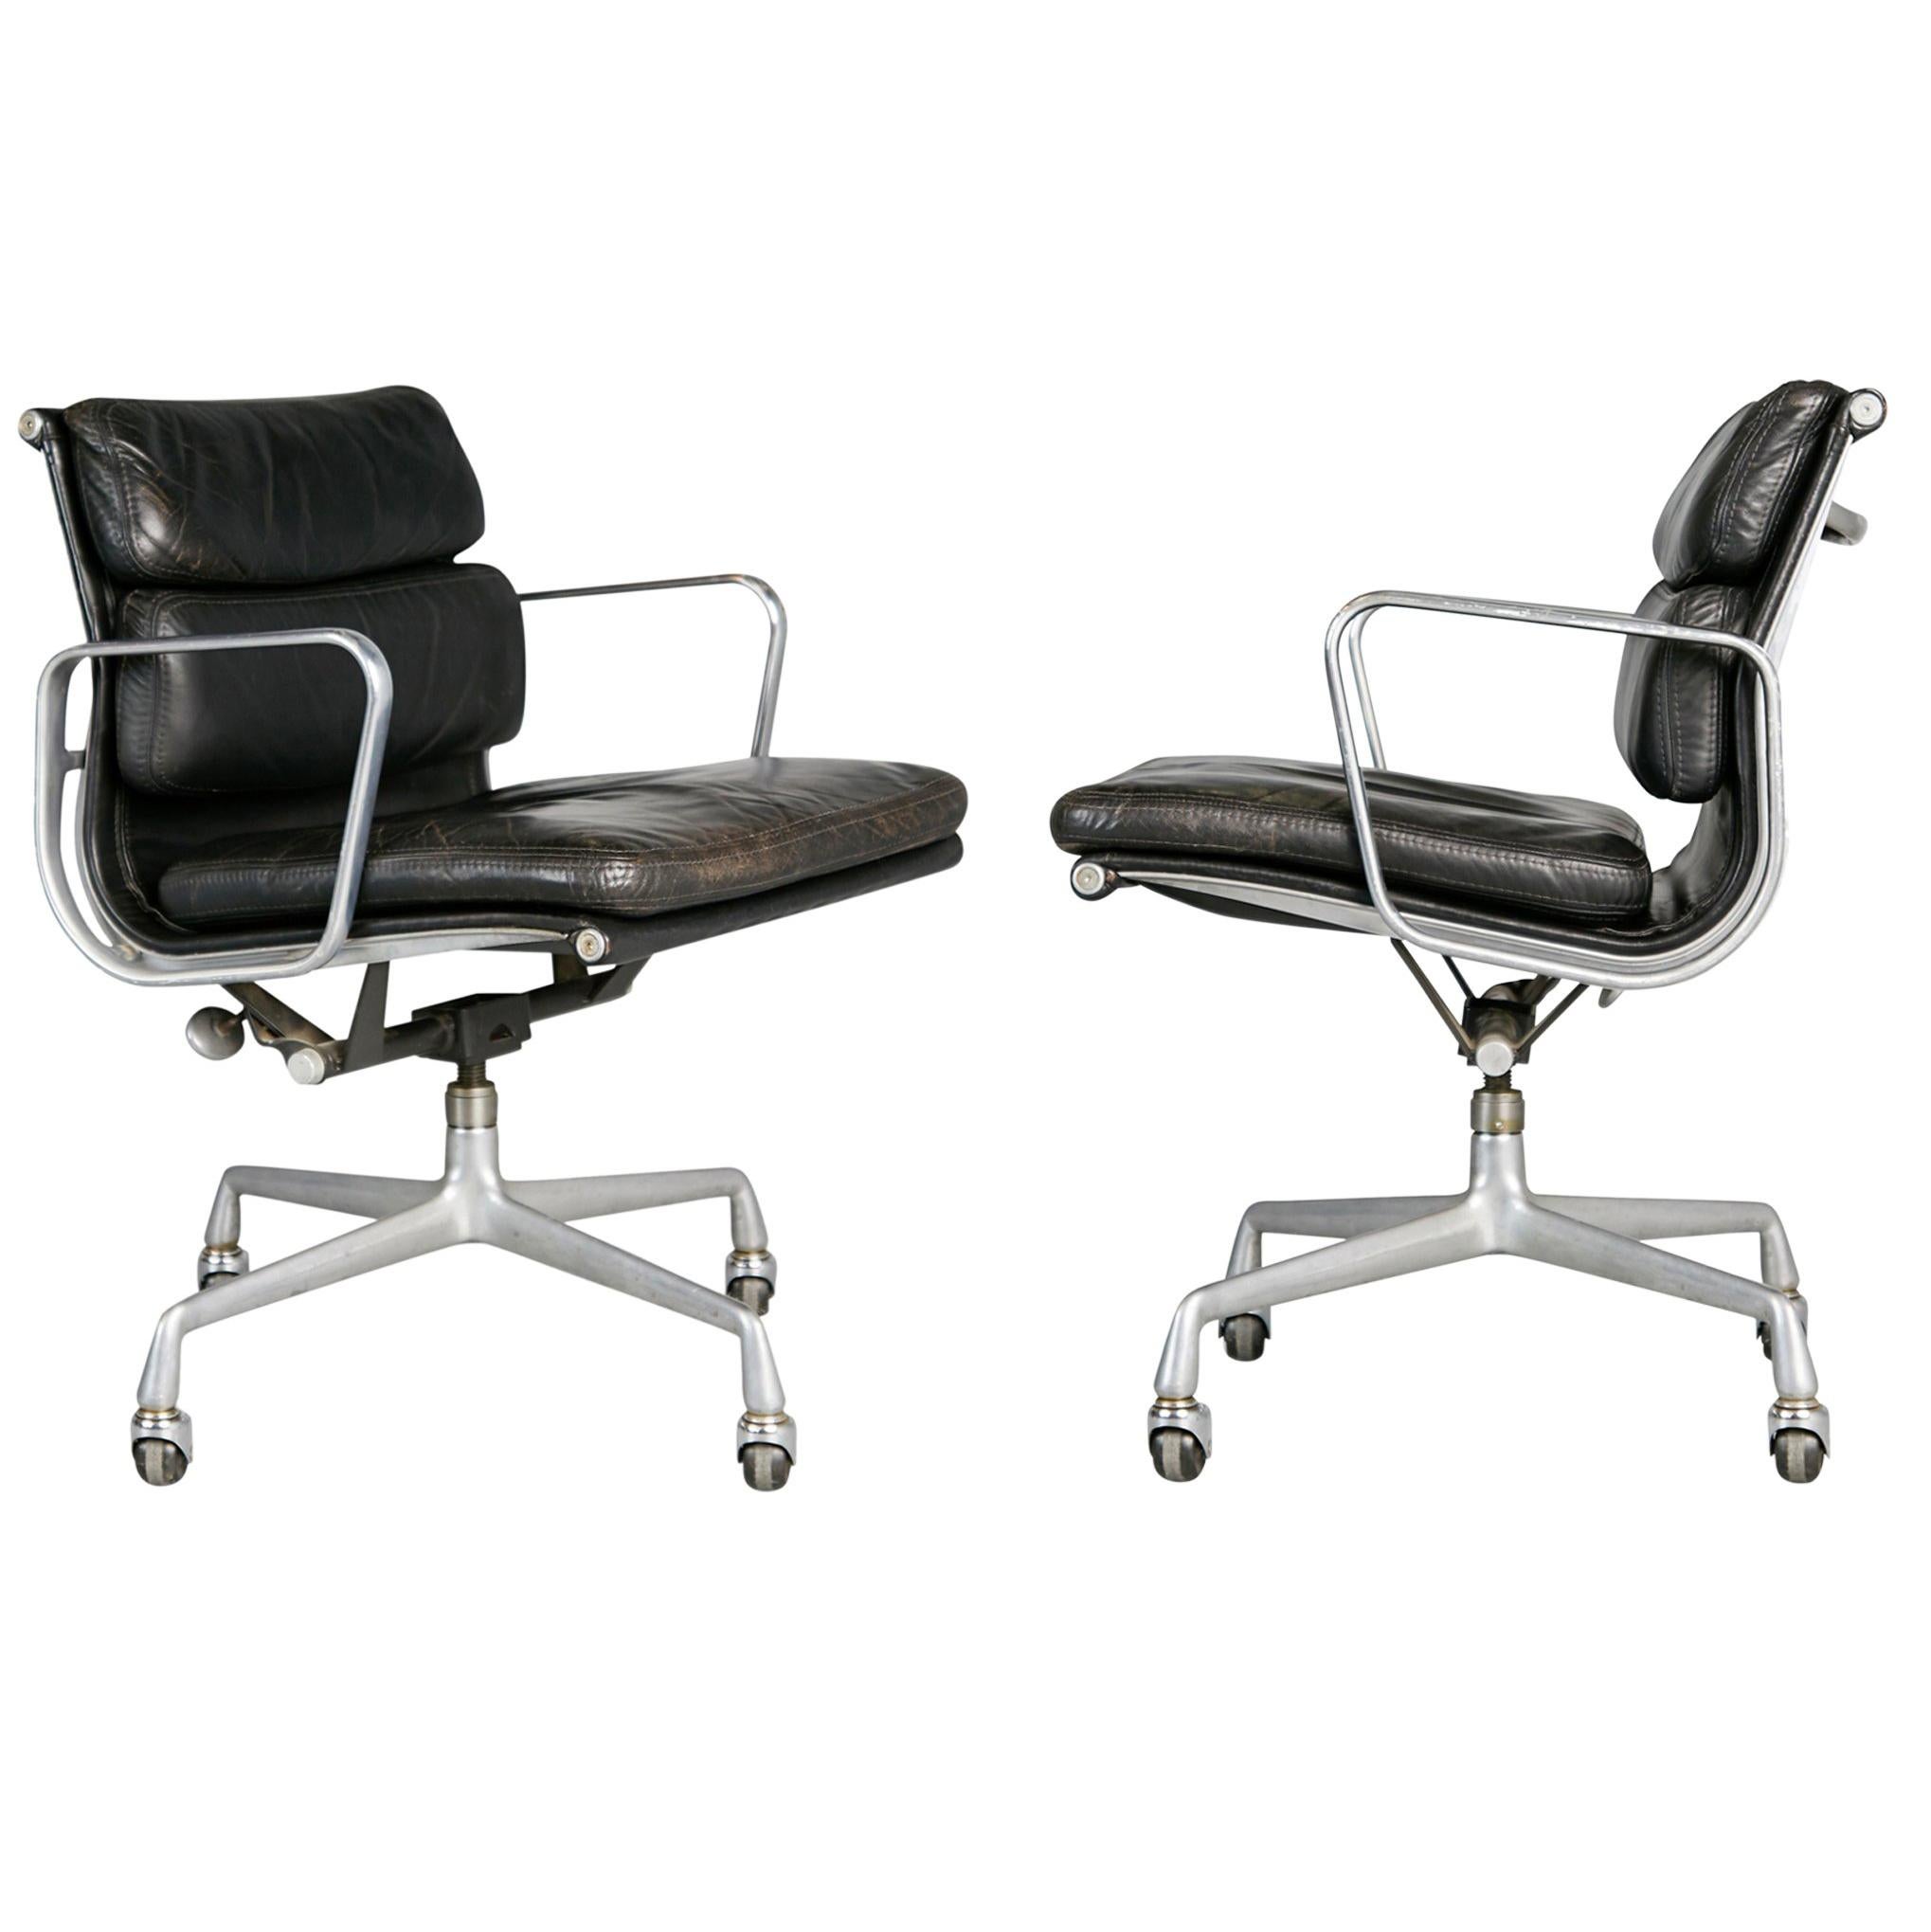 Charles Eames for Herman Miller Black Soft Pad Management Chairs, circa 1980